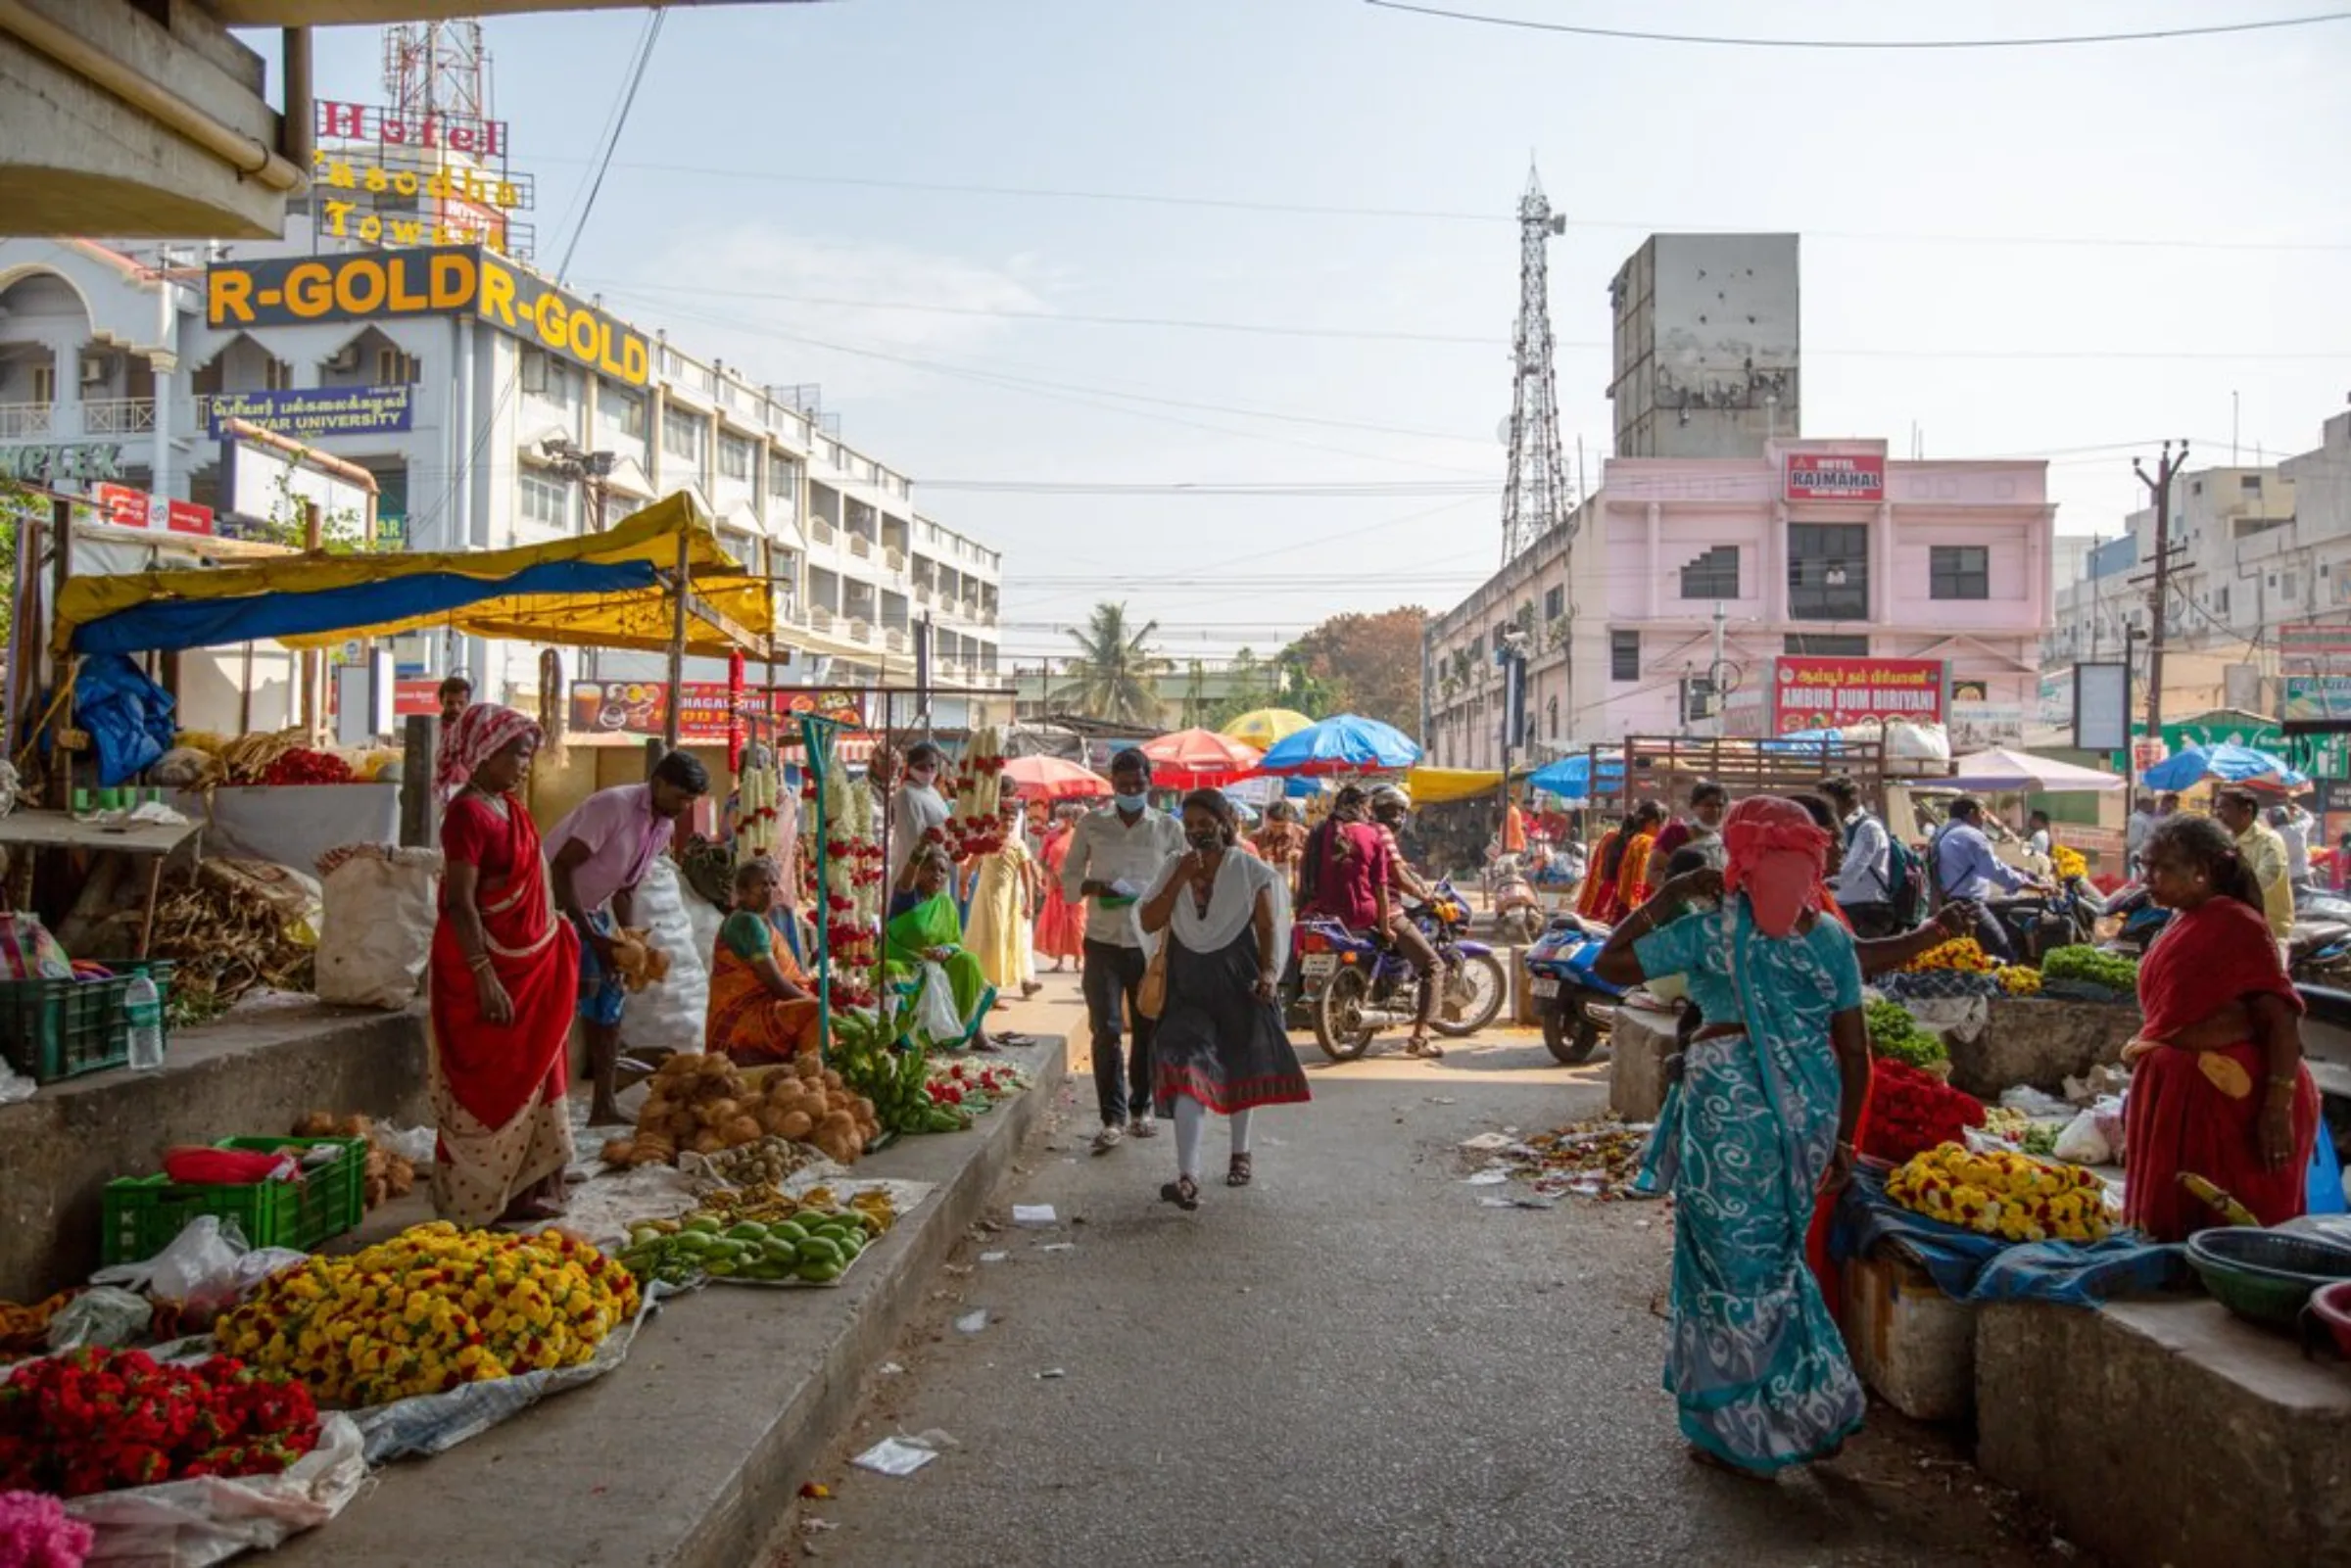 Street vendors hawk their wares on a busy street in Hosur, India, April 20, 2022